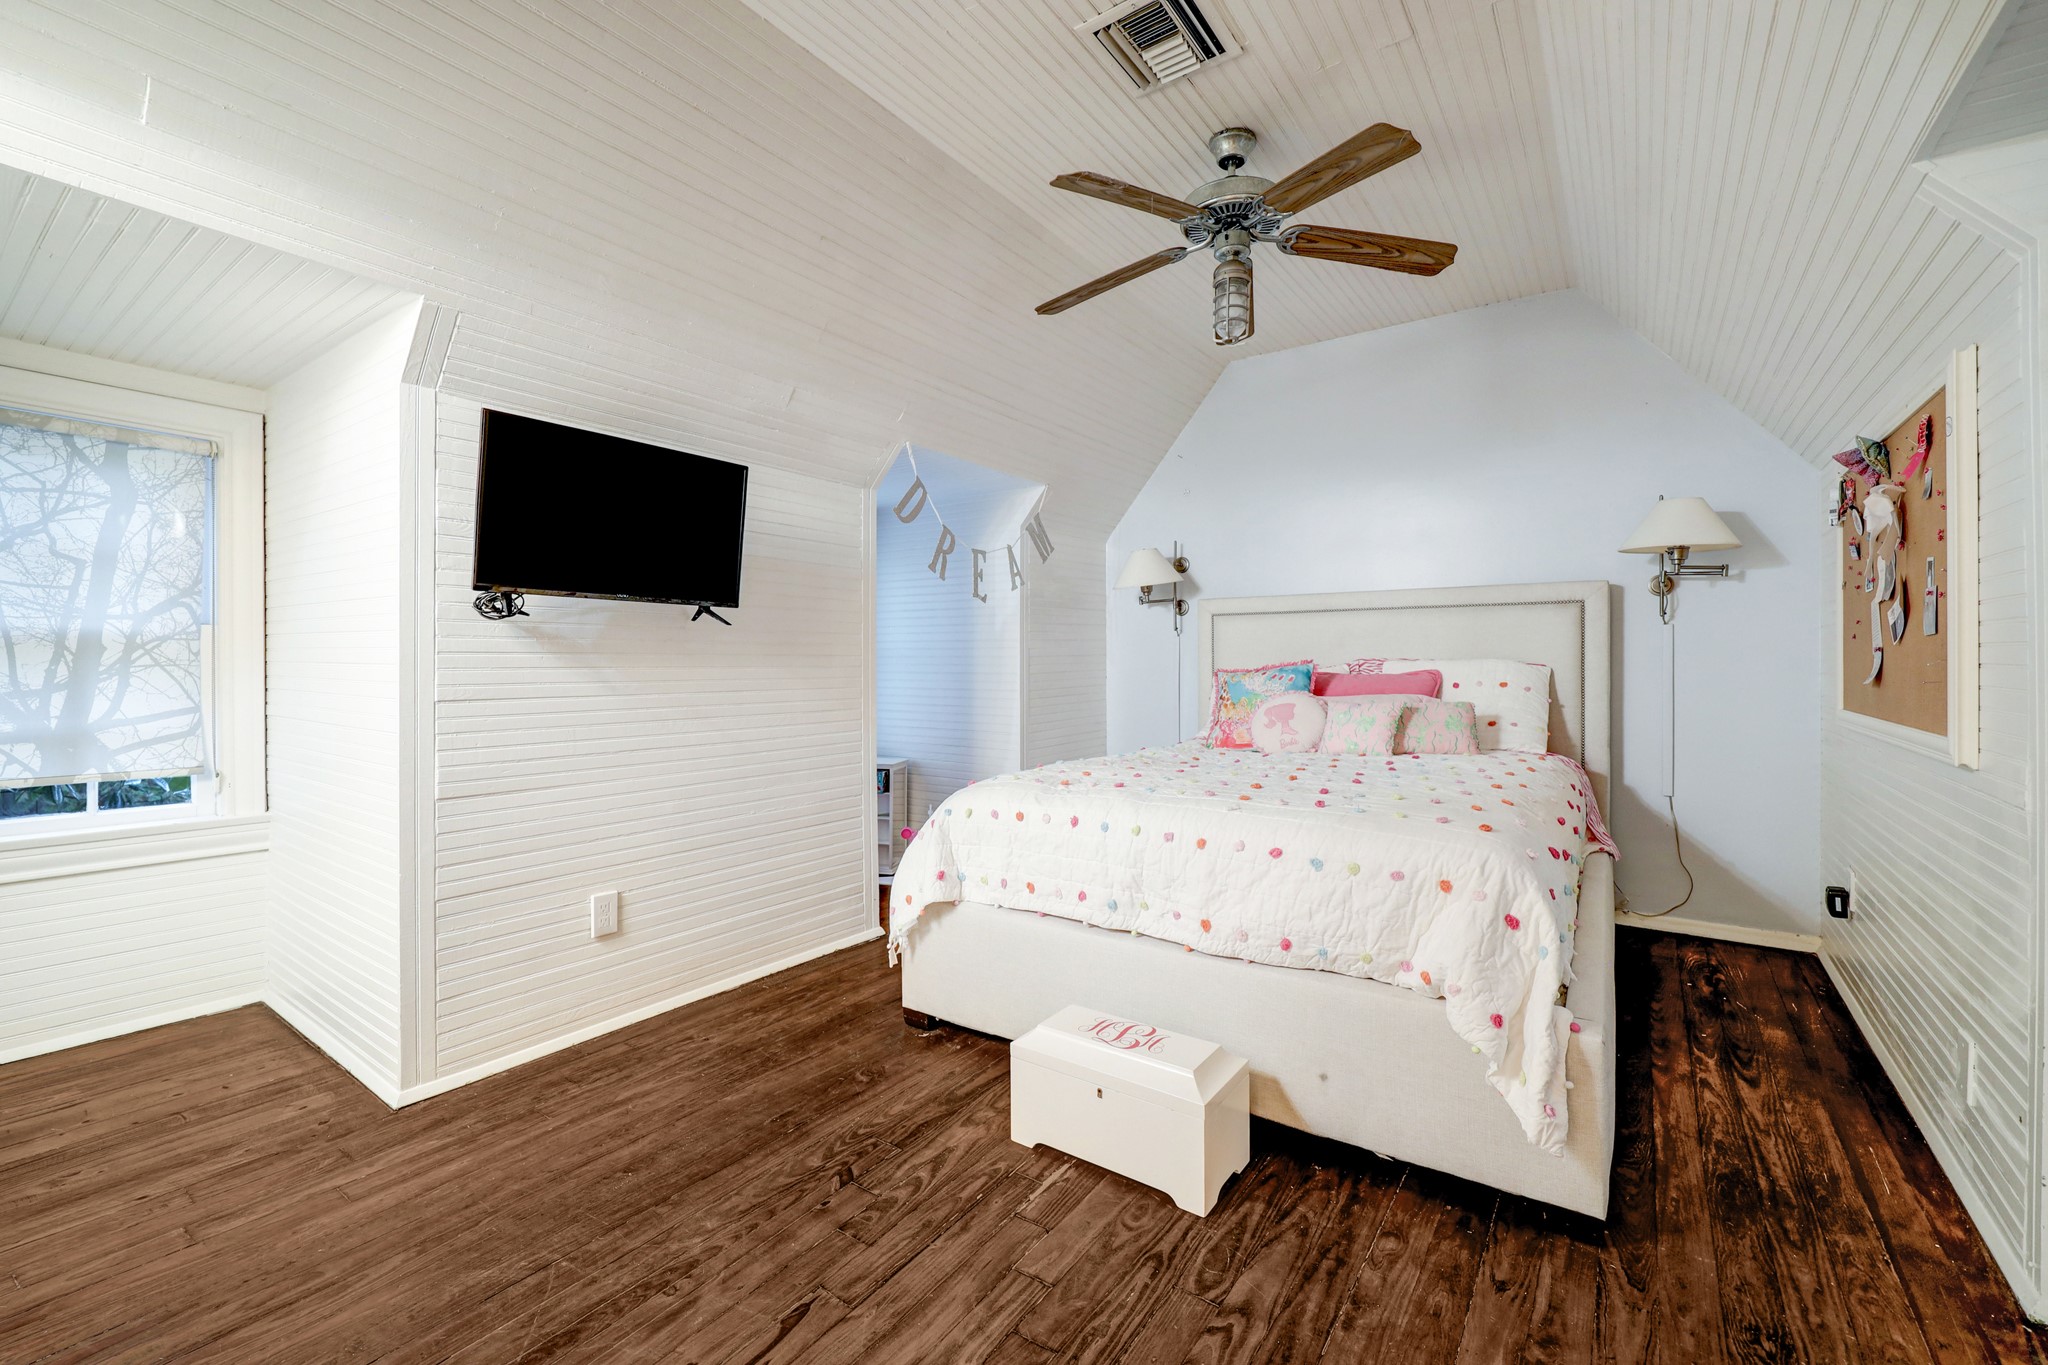 Cozy bedroom No. 2 is built under the eaves of the house and lined with beadboard.